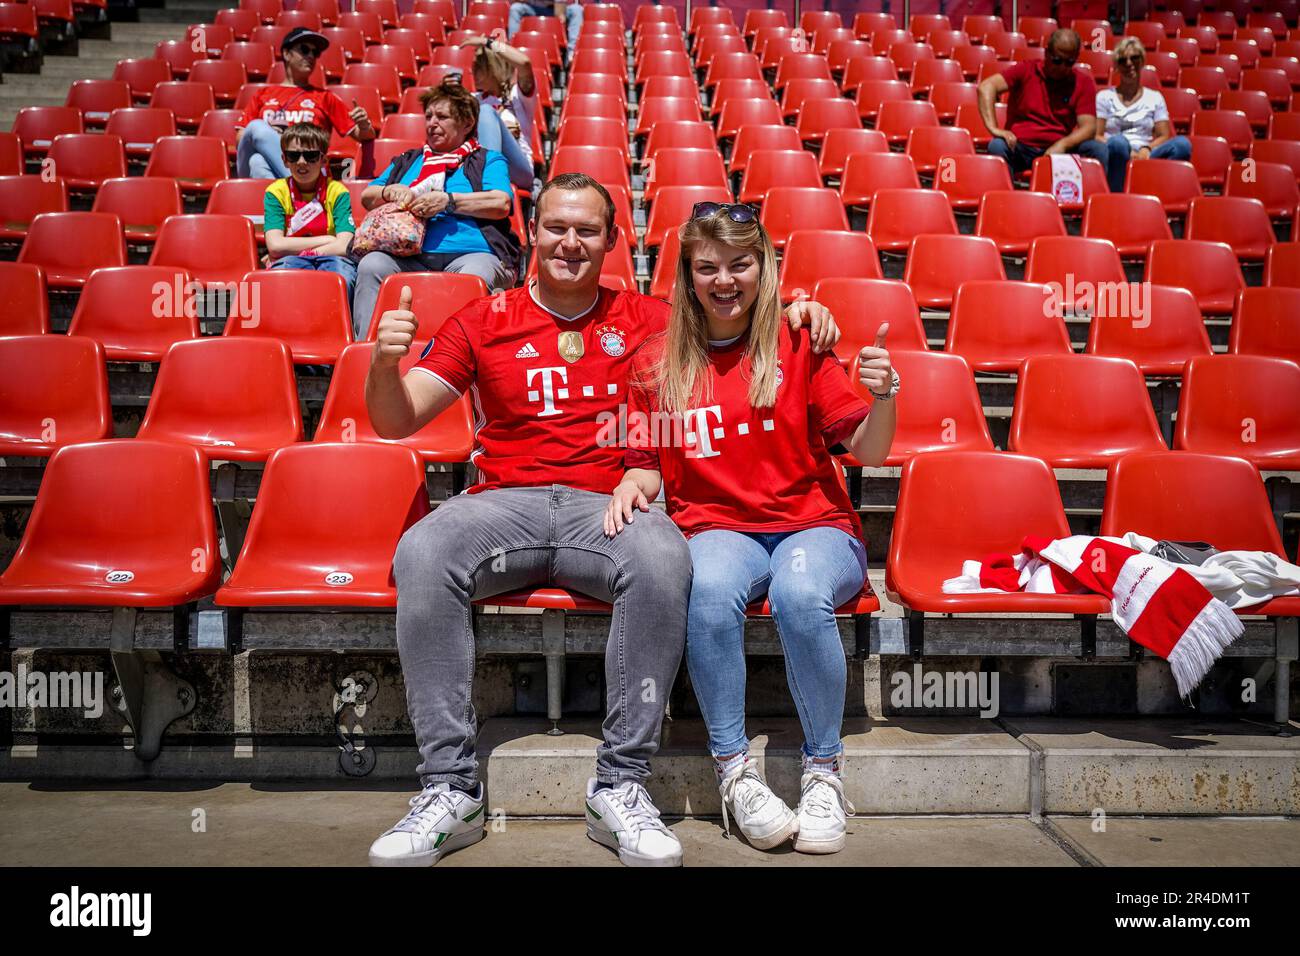 Fc bayern munchen supporters hi-res stock photography and images - Alamy